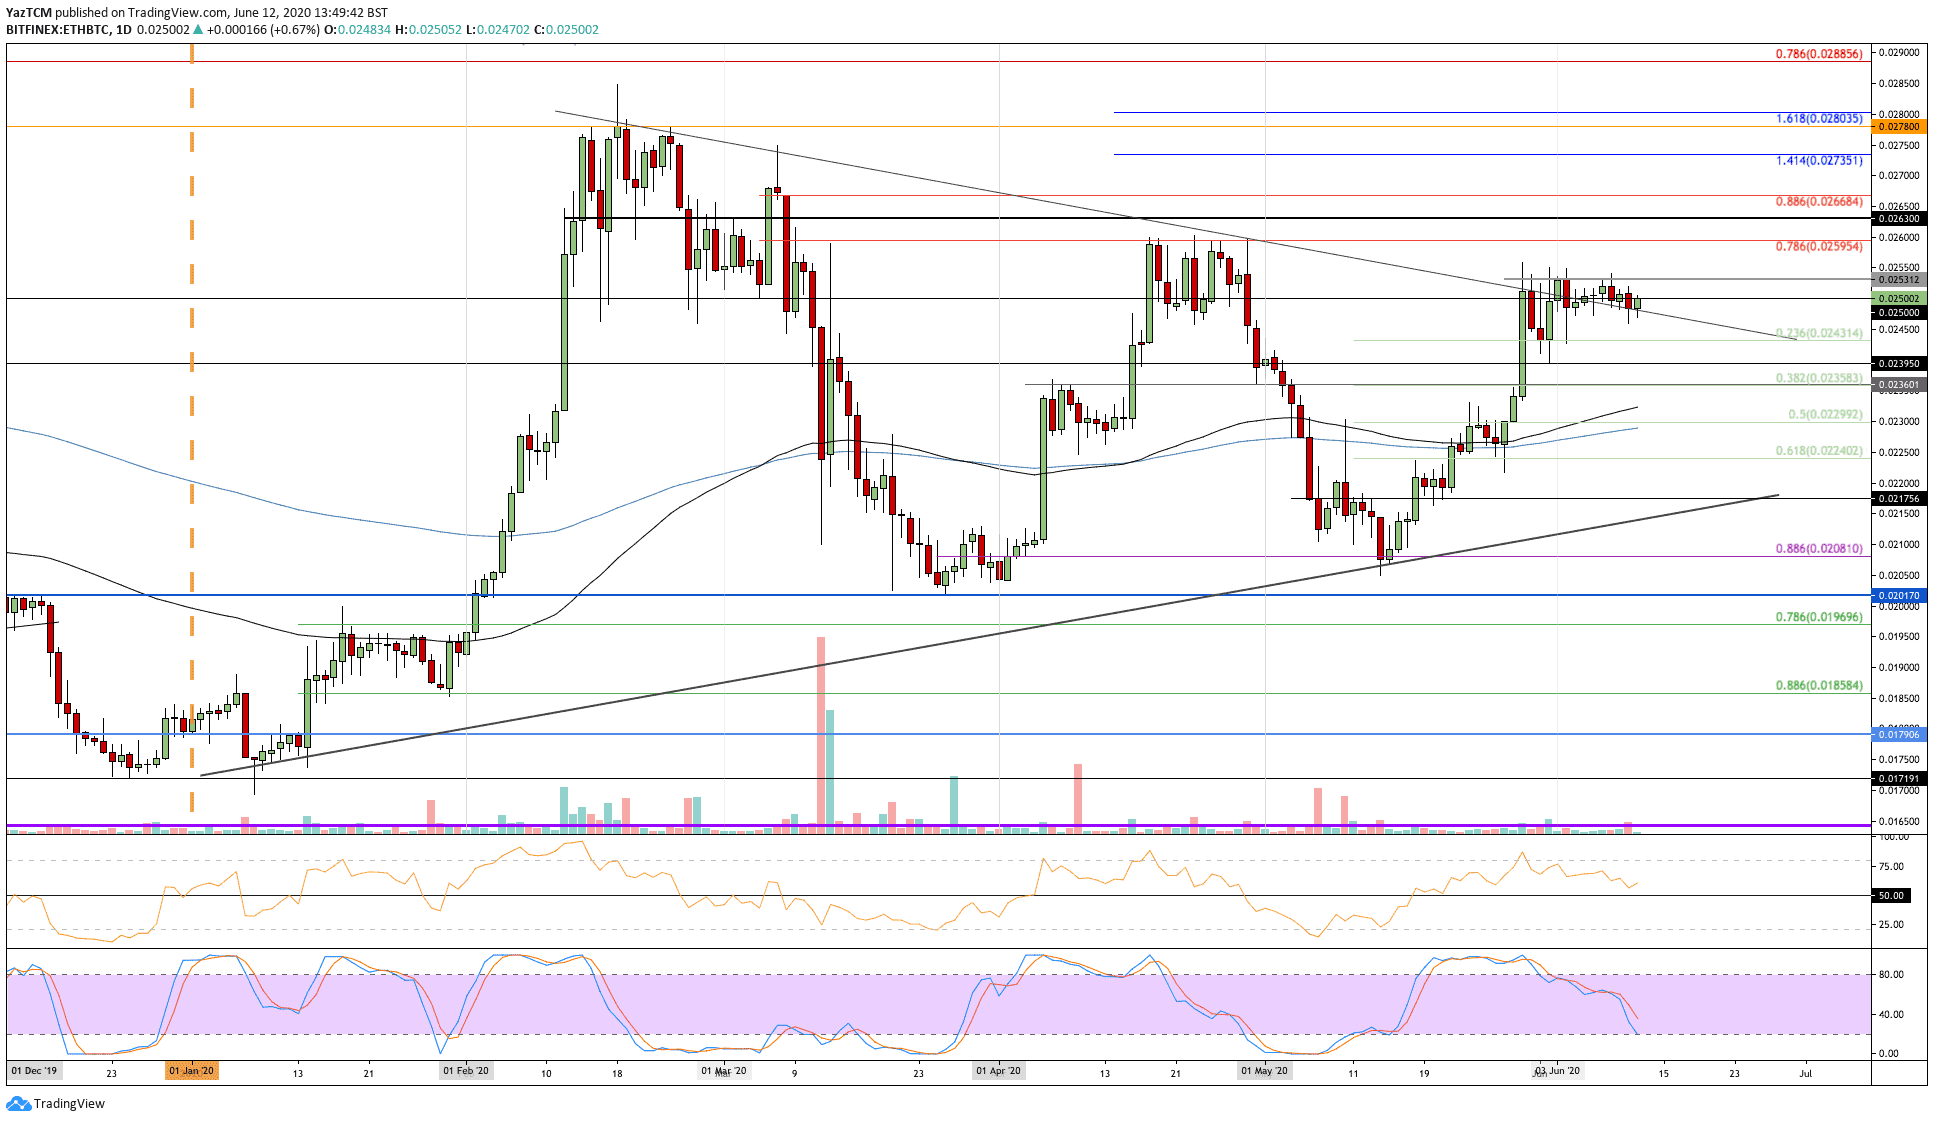 Crypto Price Analysis & Overview June 12th: Bitcoin, Ethereum, Ripple, VeChain & Kyber Network